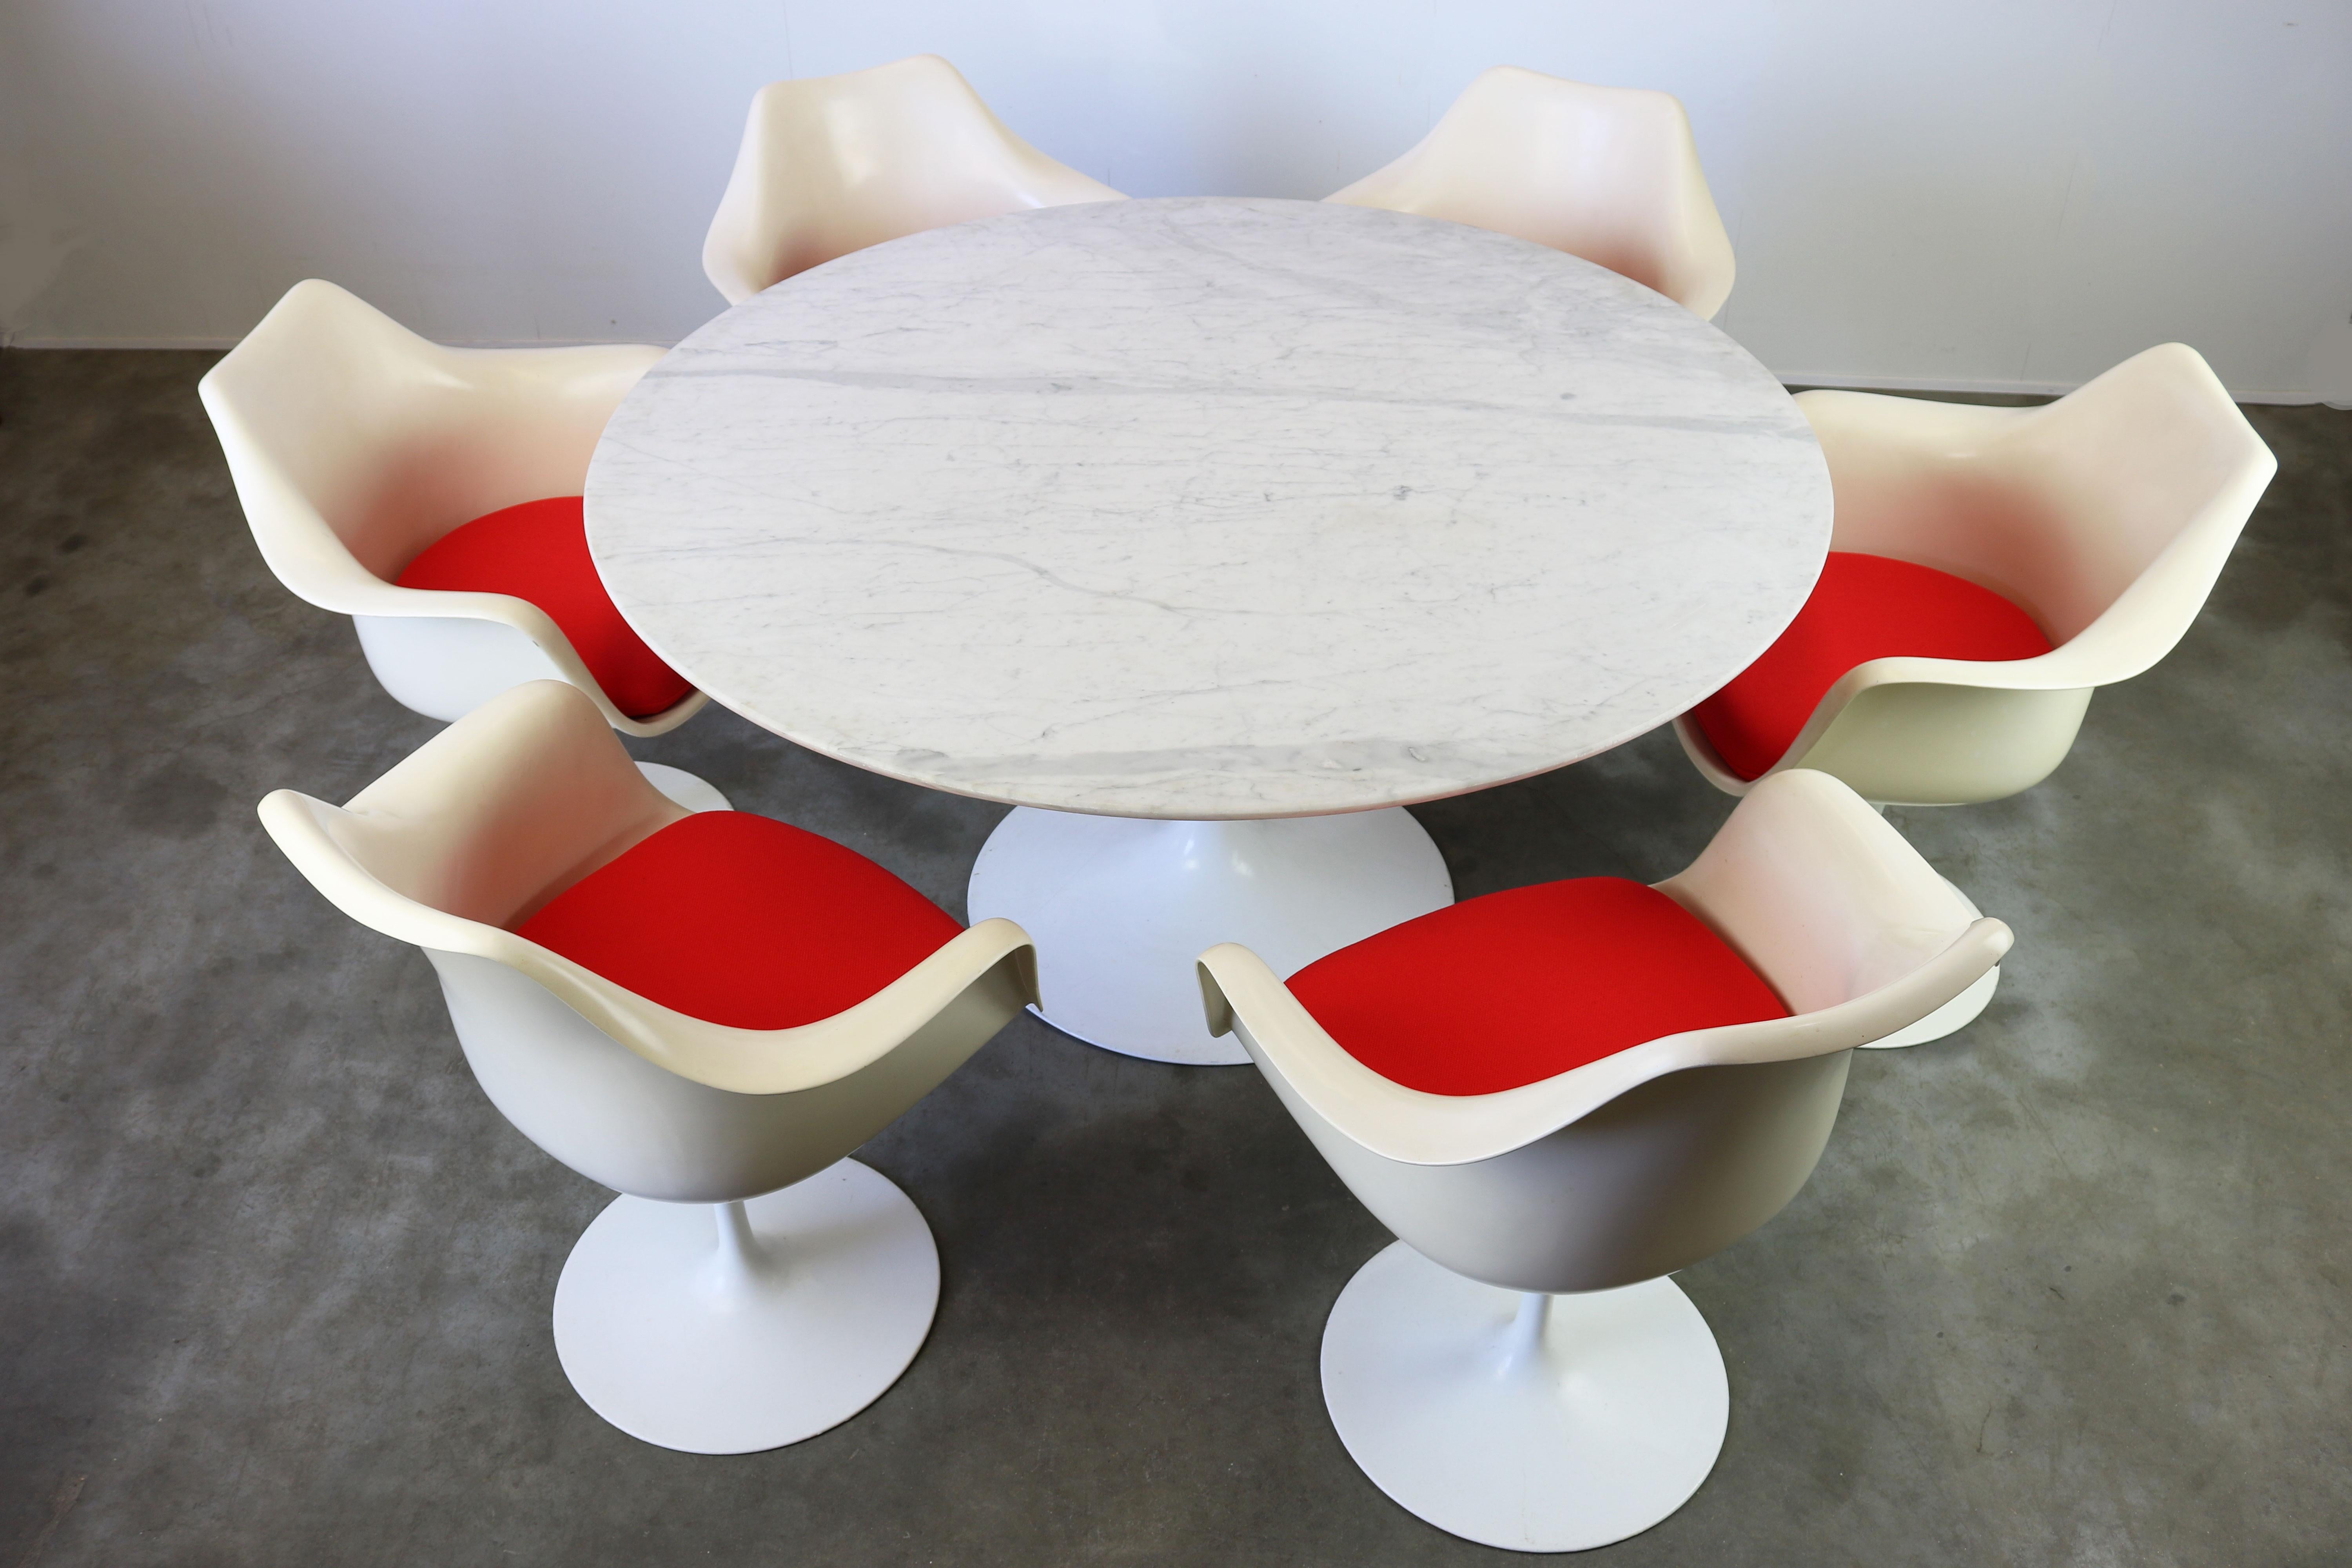 Magnificent fully original tulip dining set designed by Eero Saarinen and produced by Knoll International in the 1960s. The set consists of 6 original marked tulip armchairs and the original matching round marble table, the largest version with a